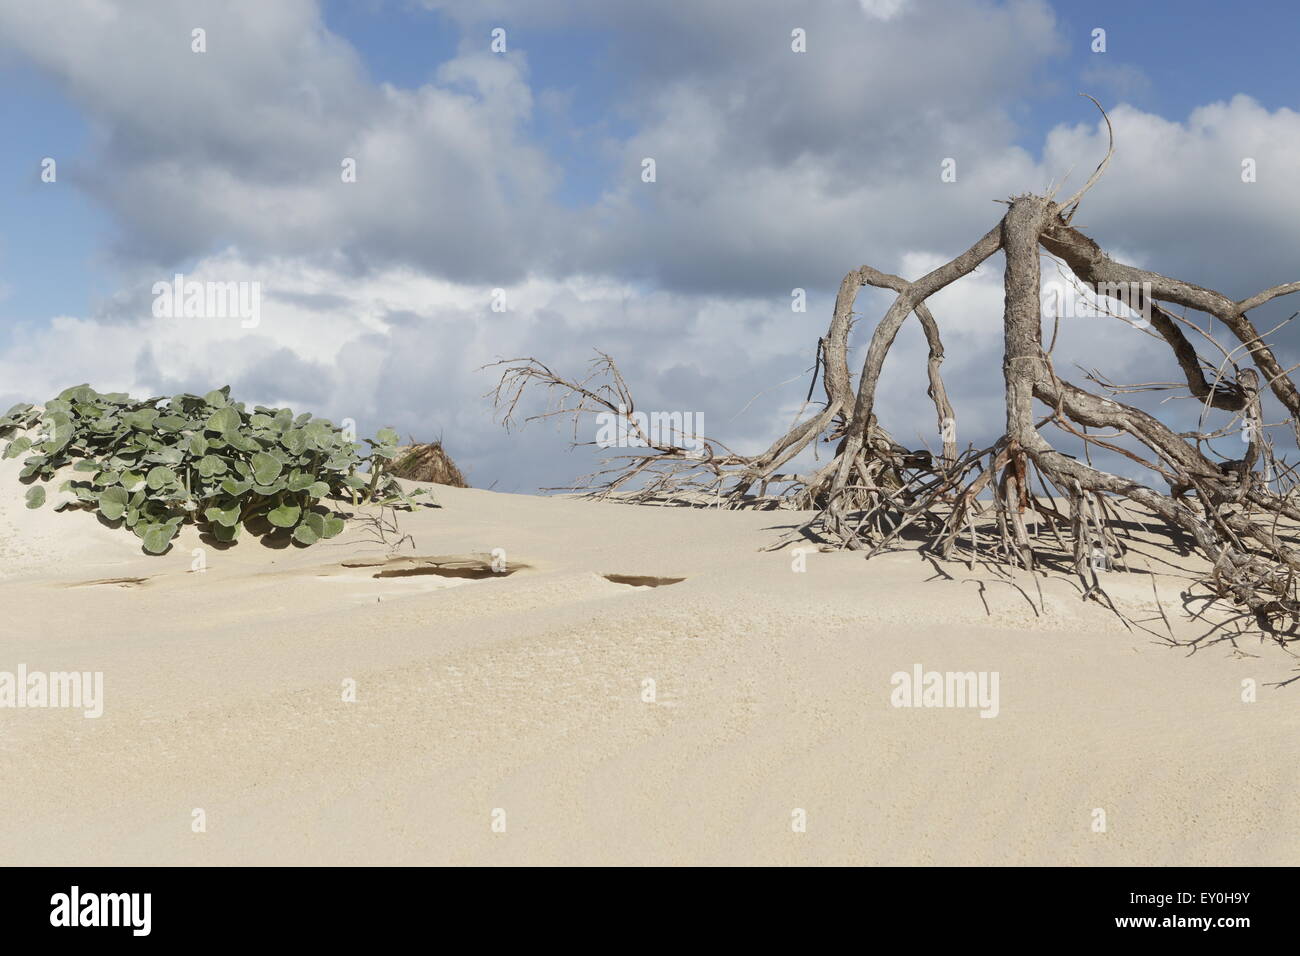 Tangled roots and vegetation on beach dunes in the De Plaat area of Struisbaai Stock Photo